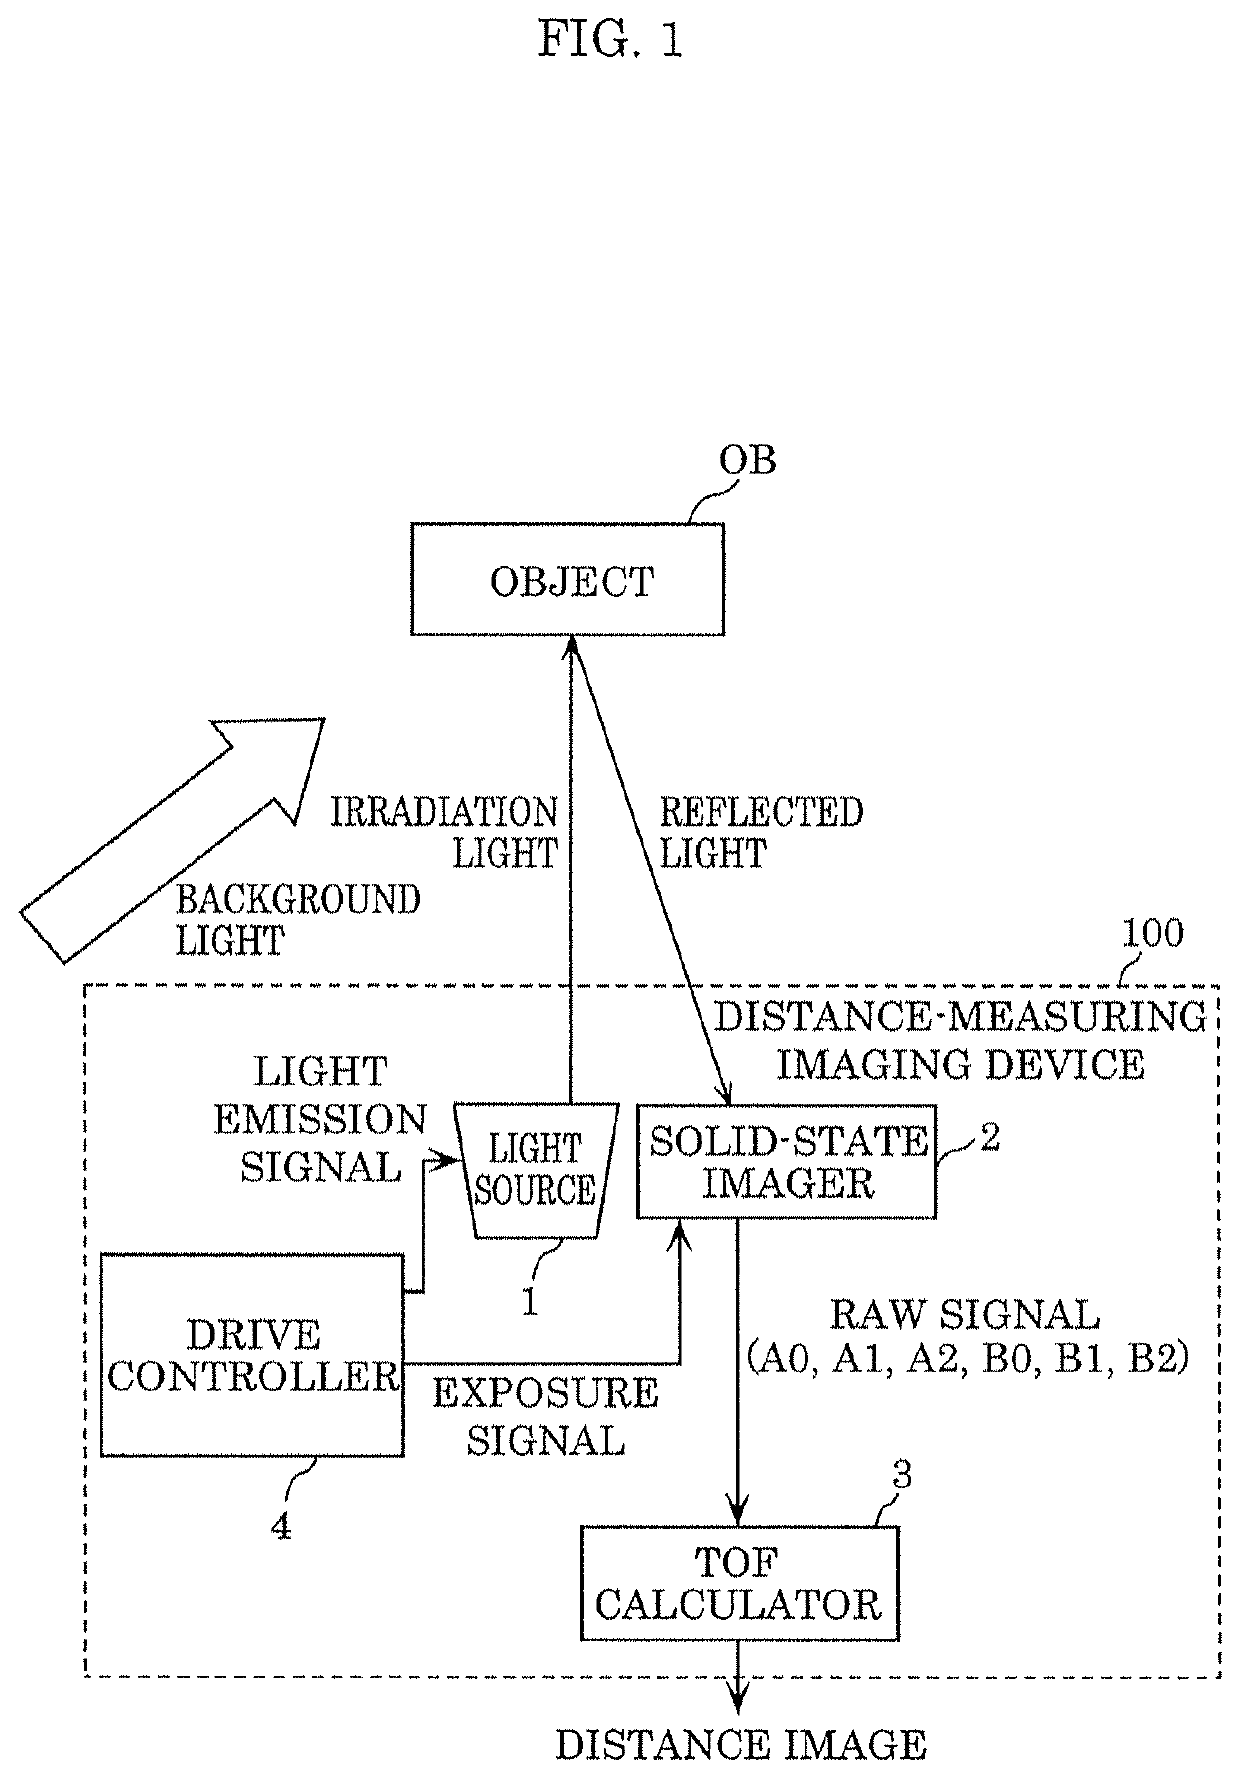 Distance-measuring imaging device and solid-state imaging device